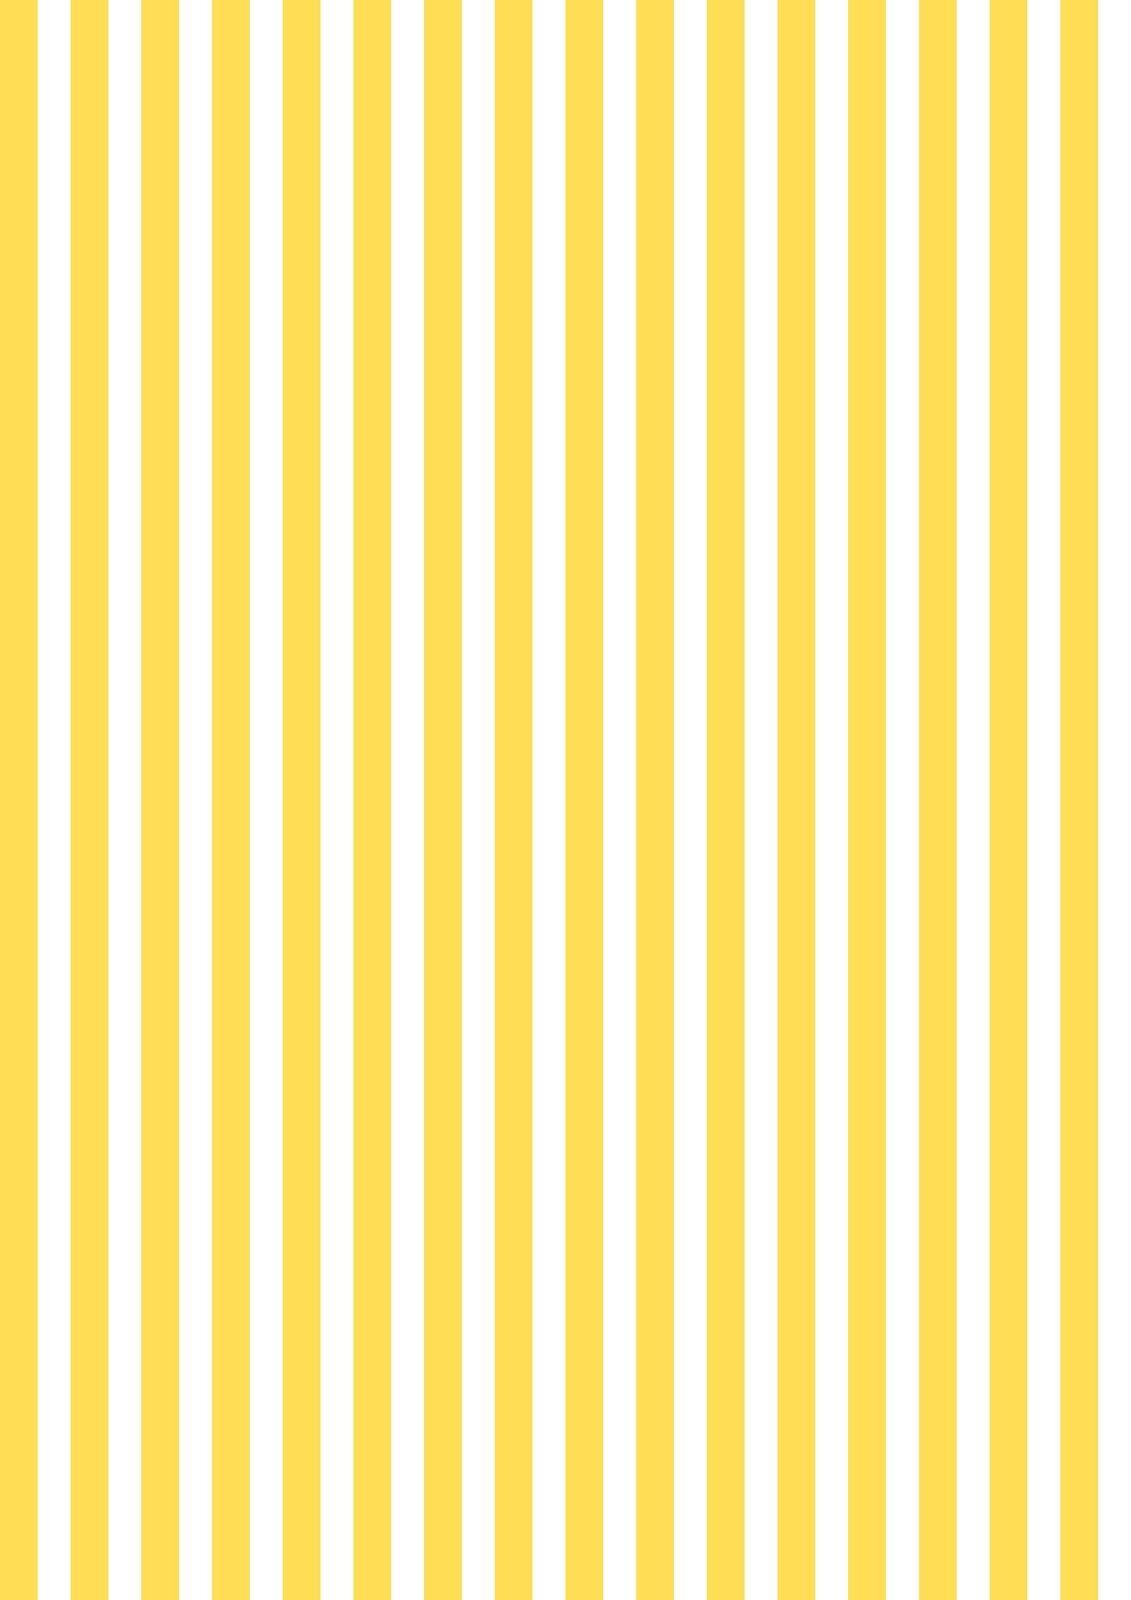 White Stripes with Yellow Logo - Free digital striped scrapbooking paper